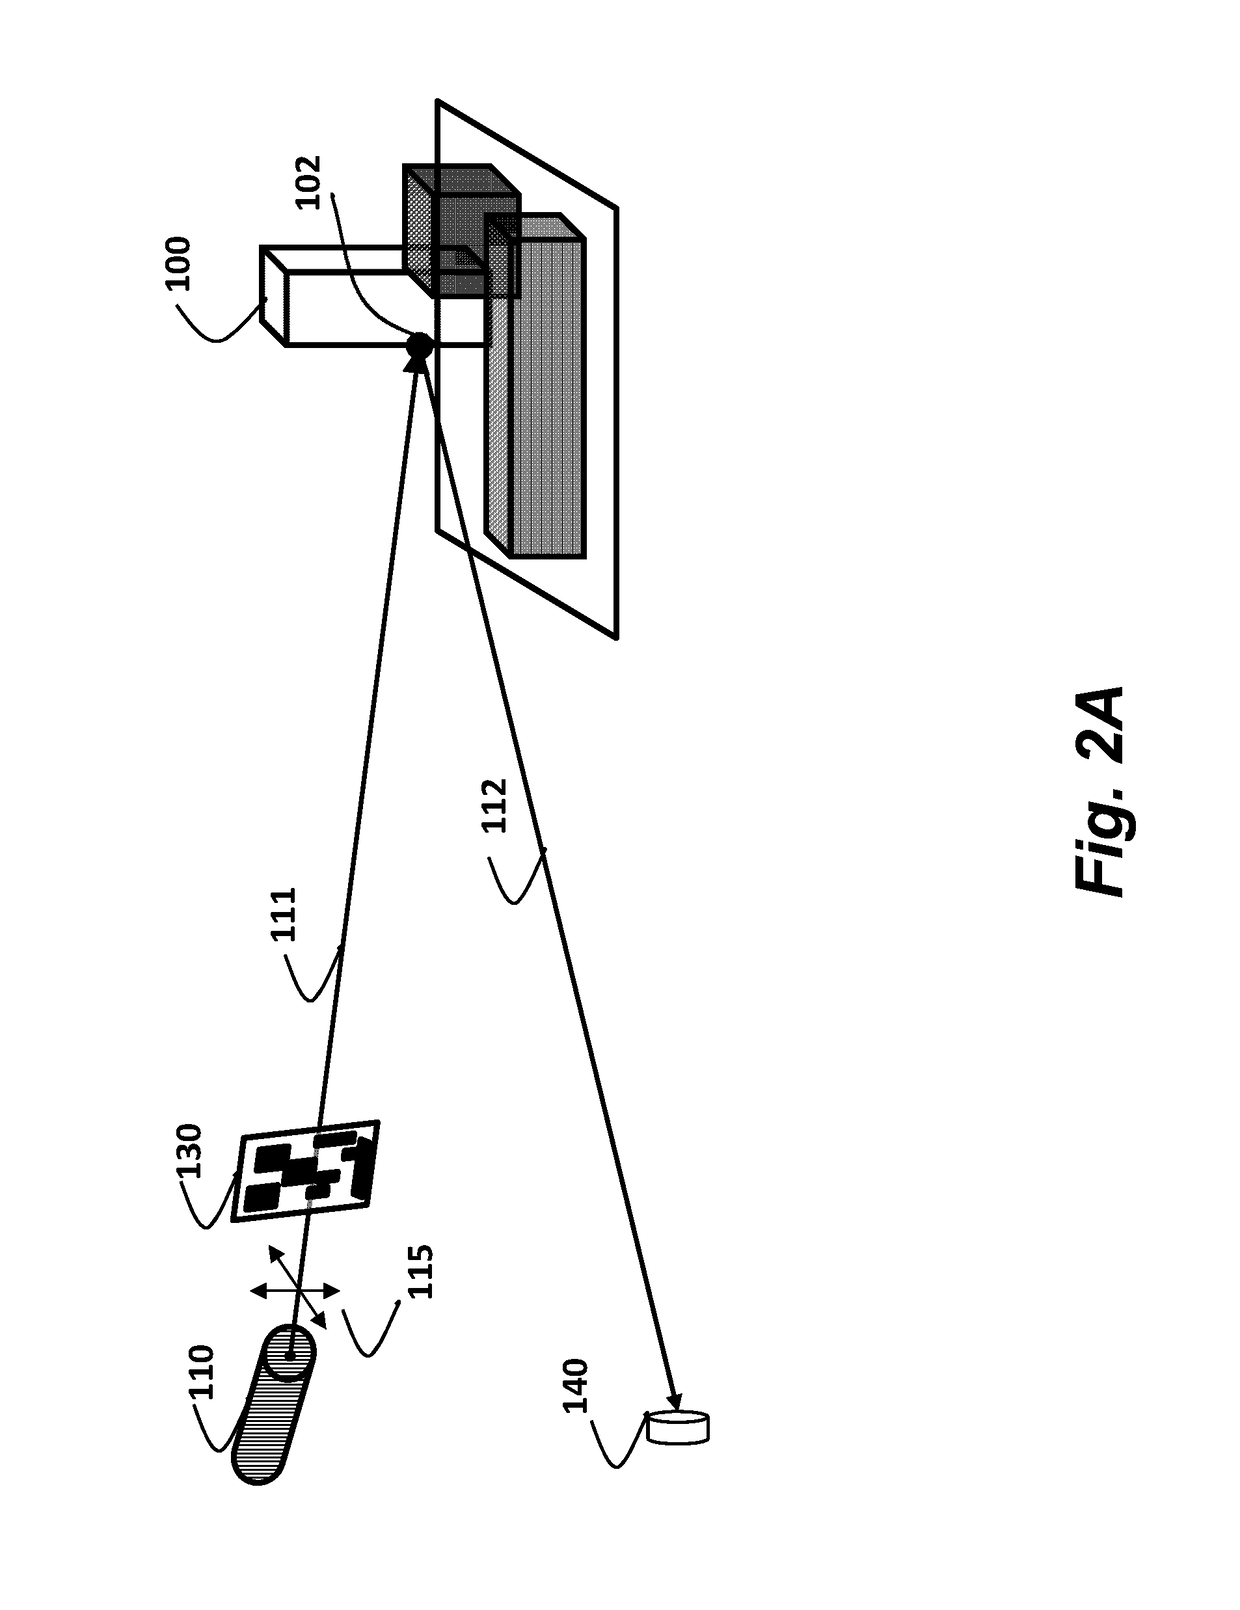 Depth sensing using optical pulses and fixed coded aperature